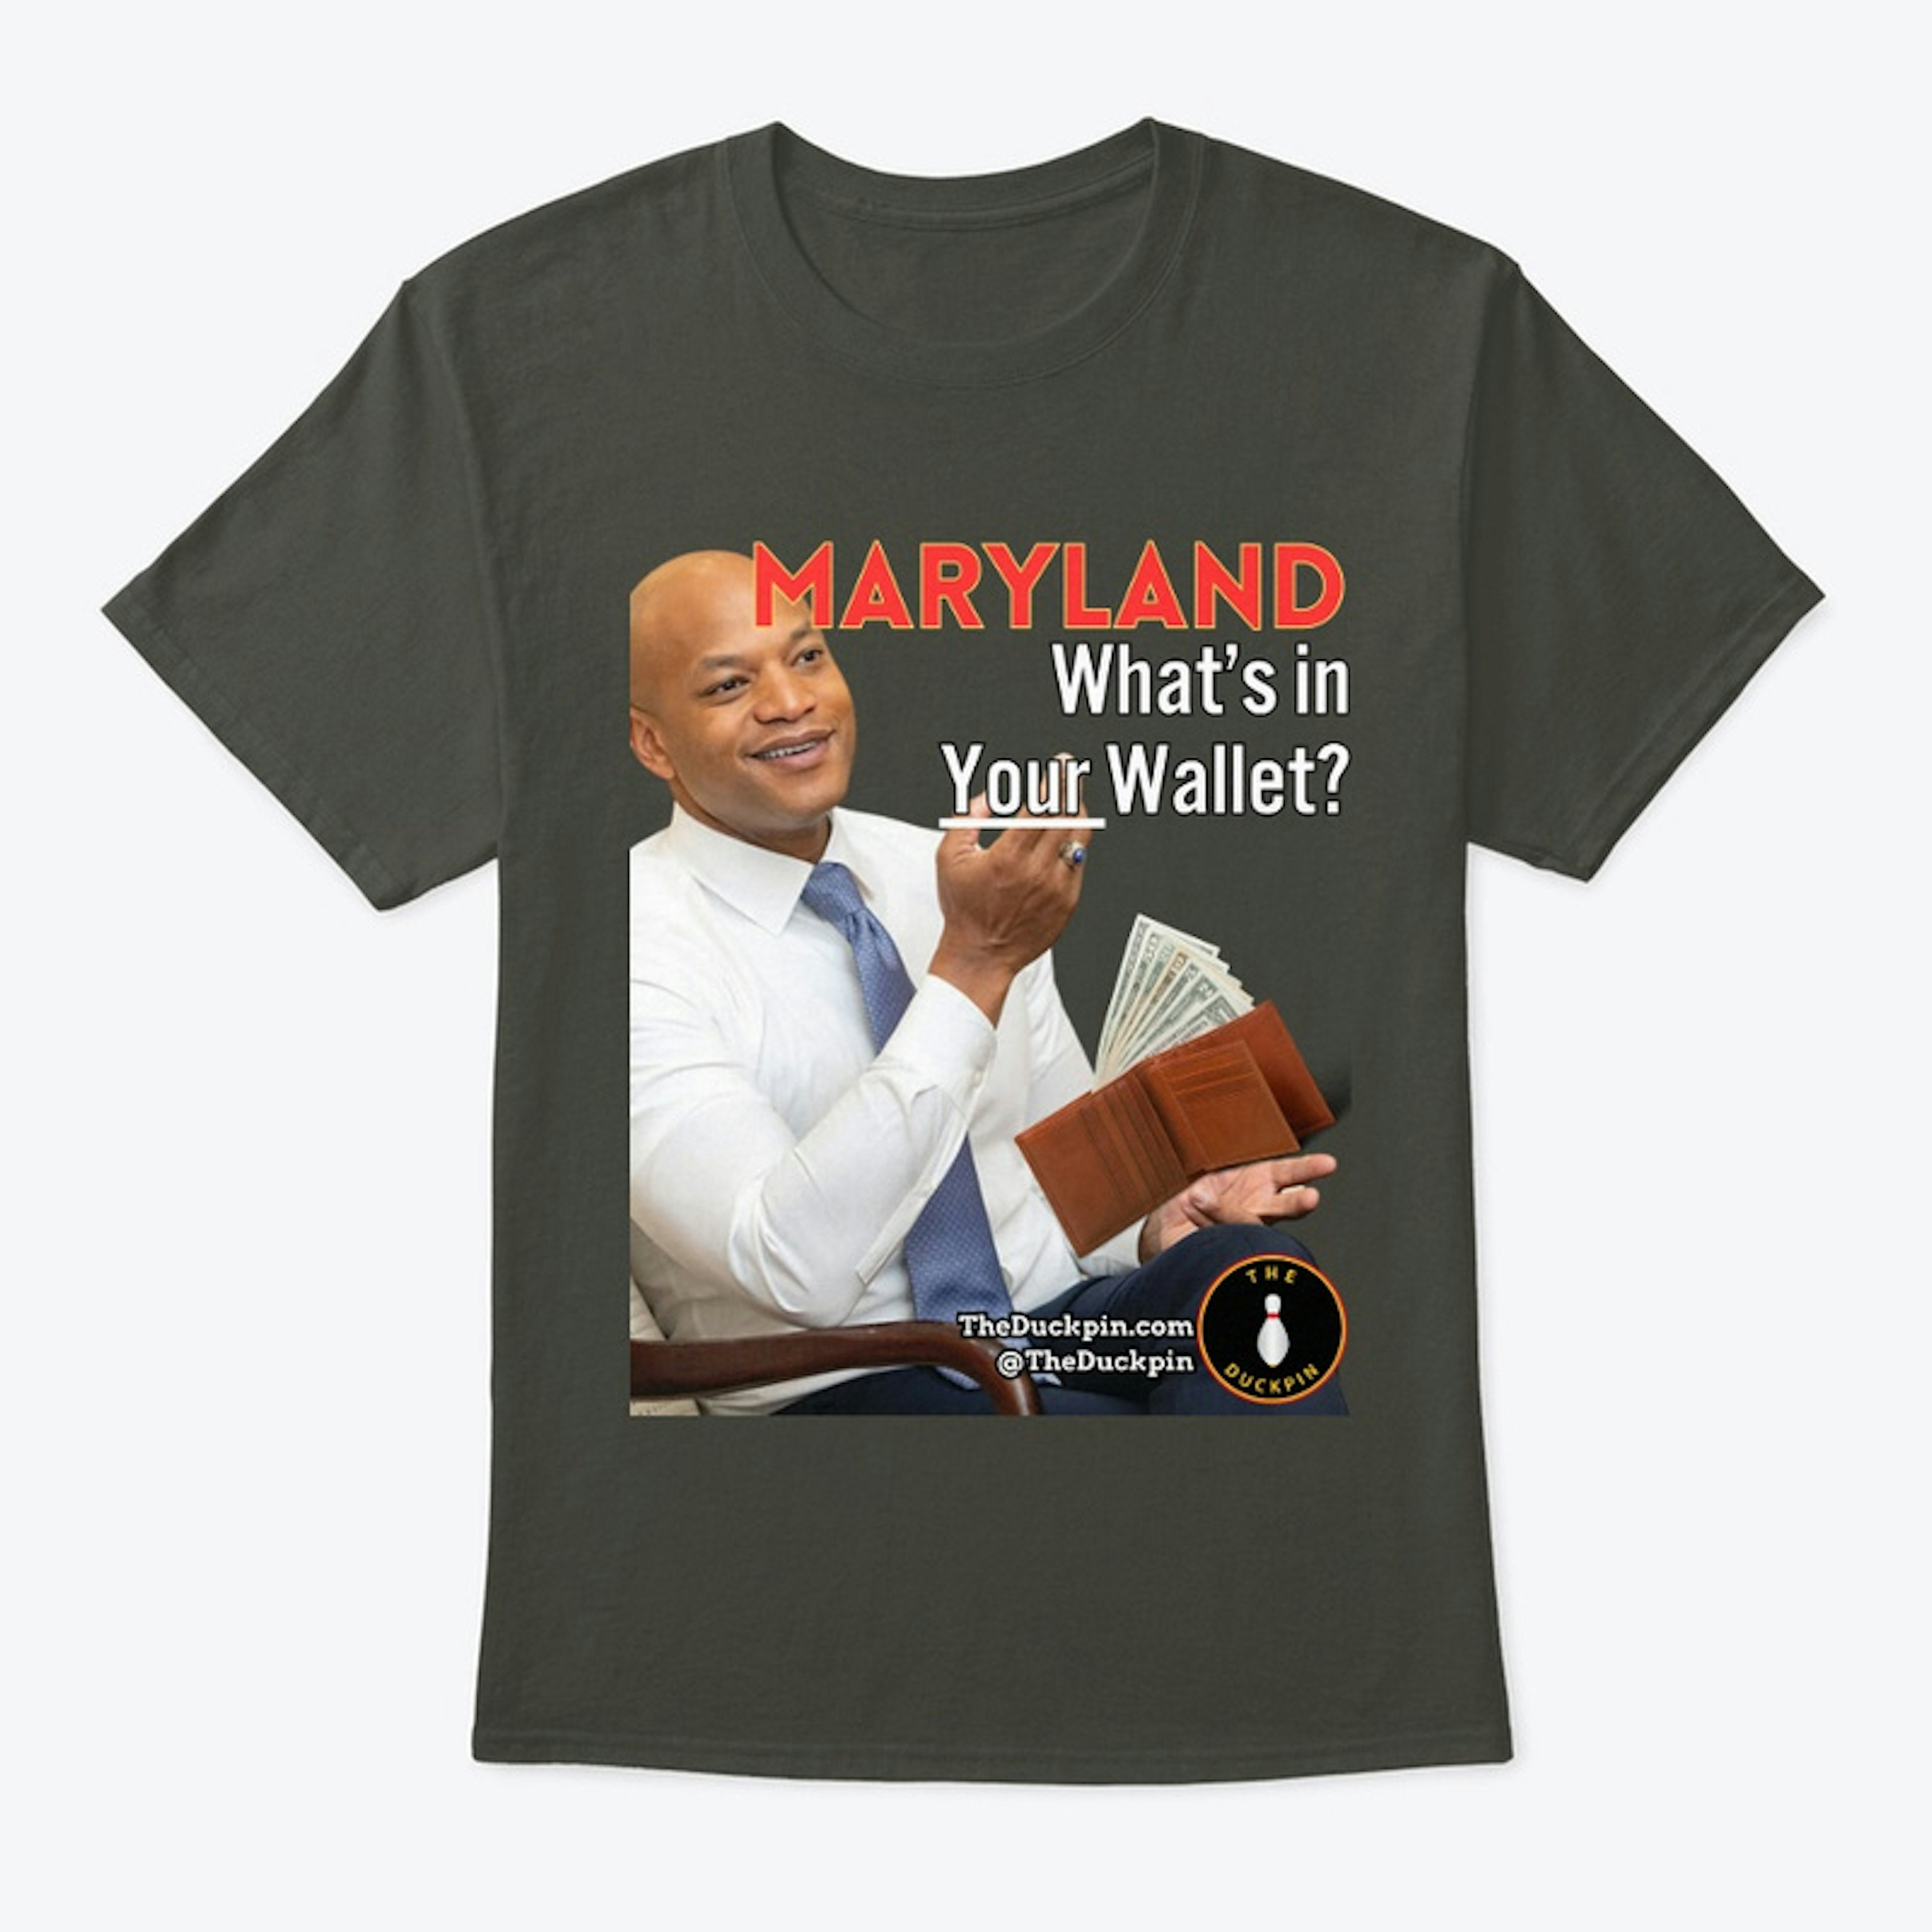 Maryland: What's in Your Wallet?